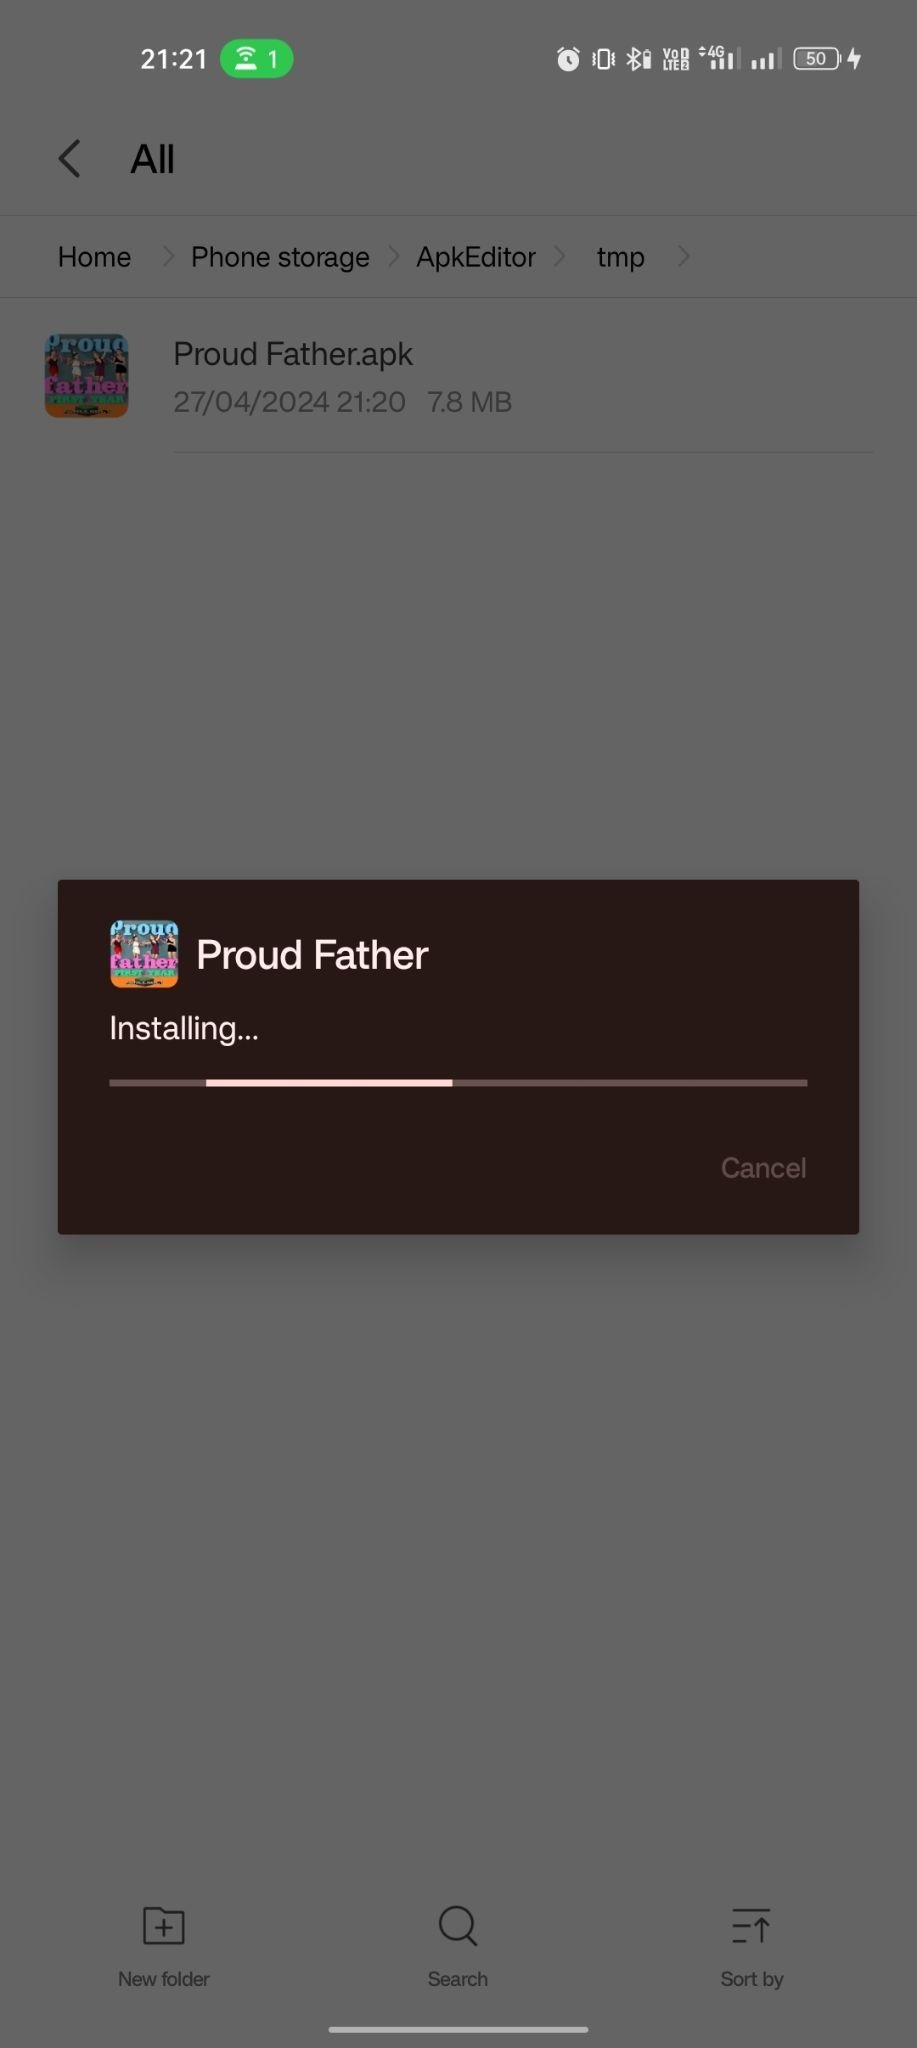 Proud Father apk installing